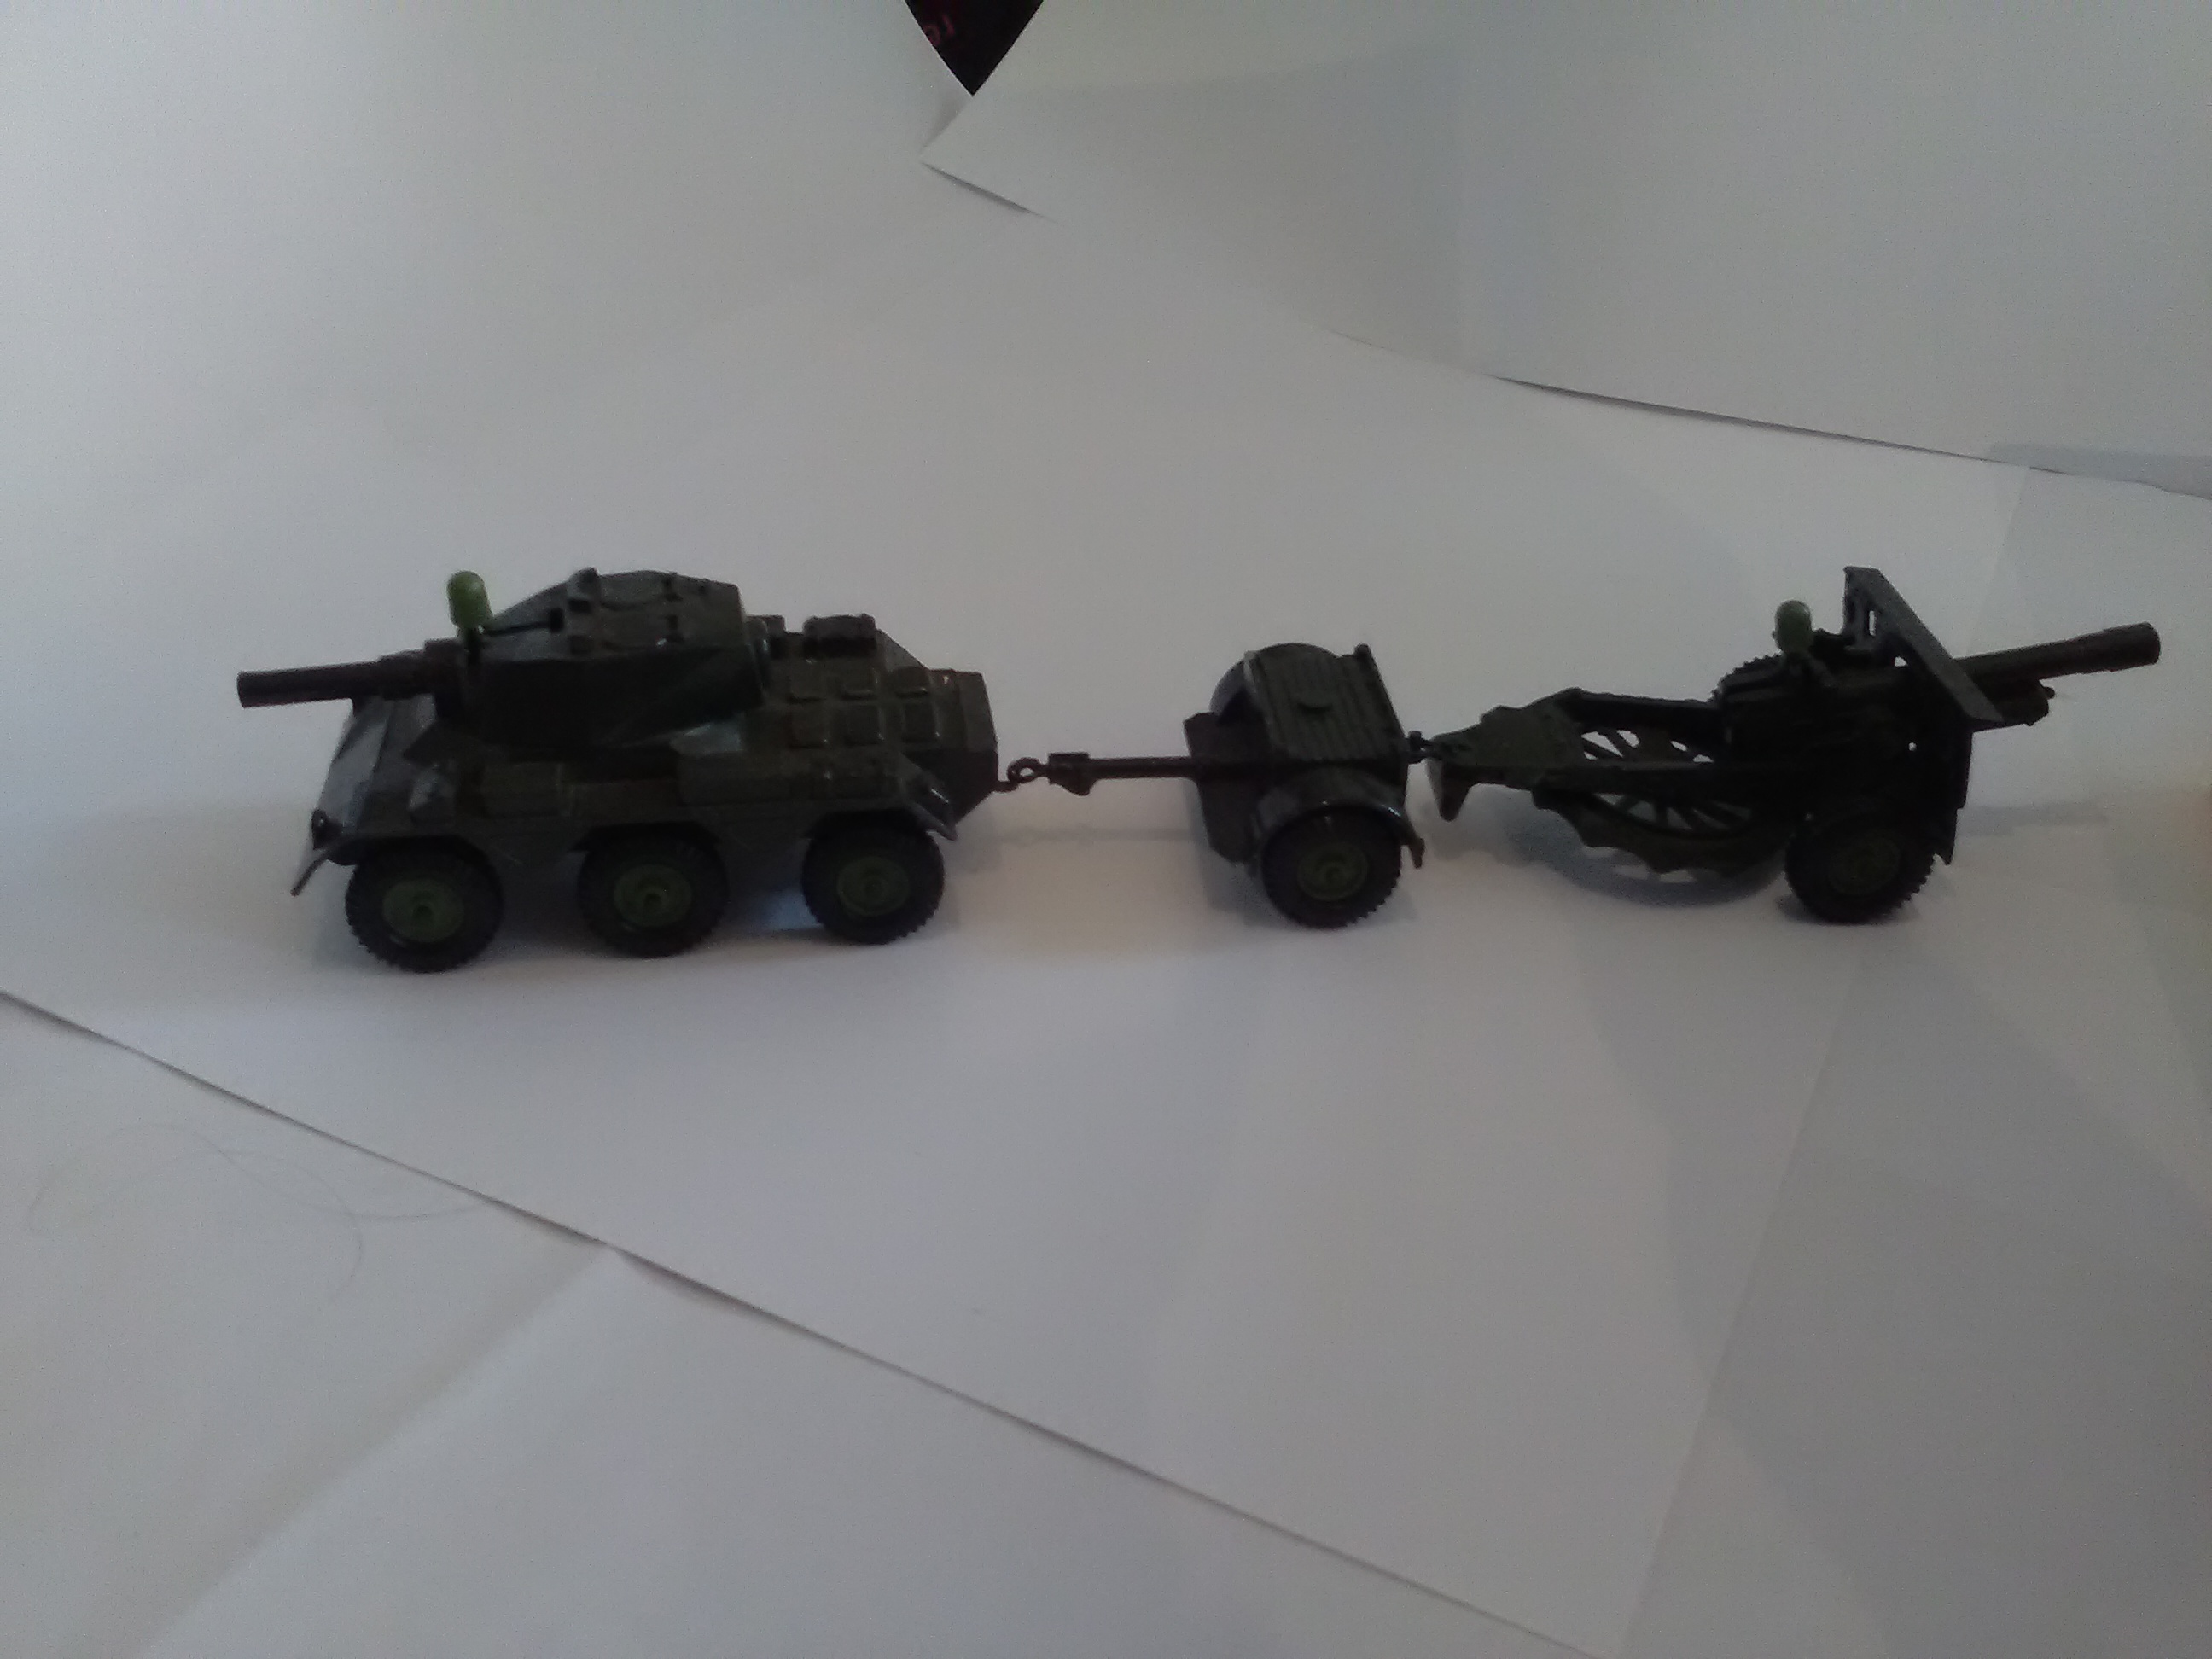 Saladin Armoured Patrol Crescent Toys model. Saladin tank towing Ammunition trailer and 25 Pounder - Image 2 of 4